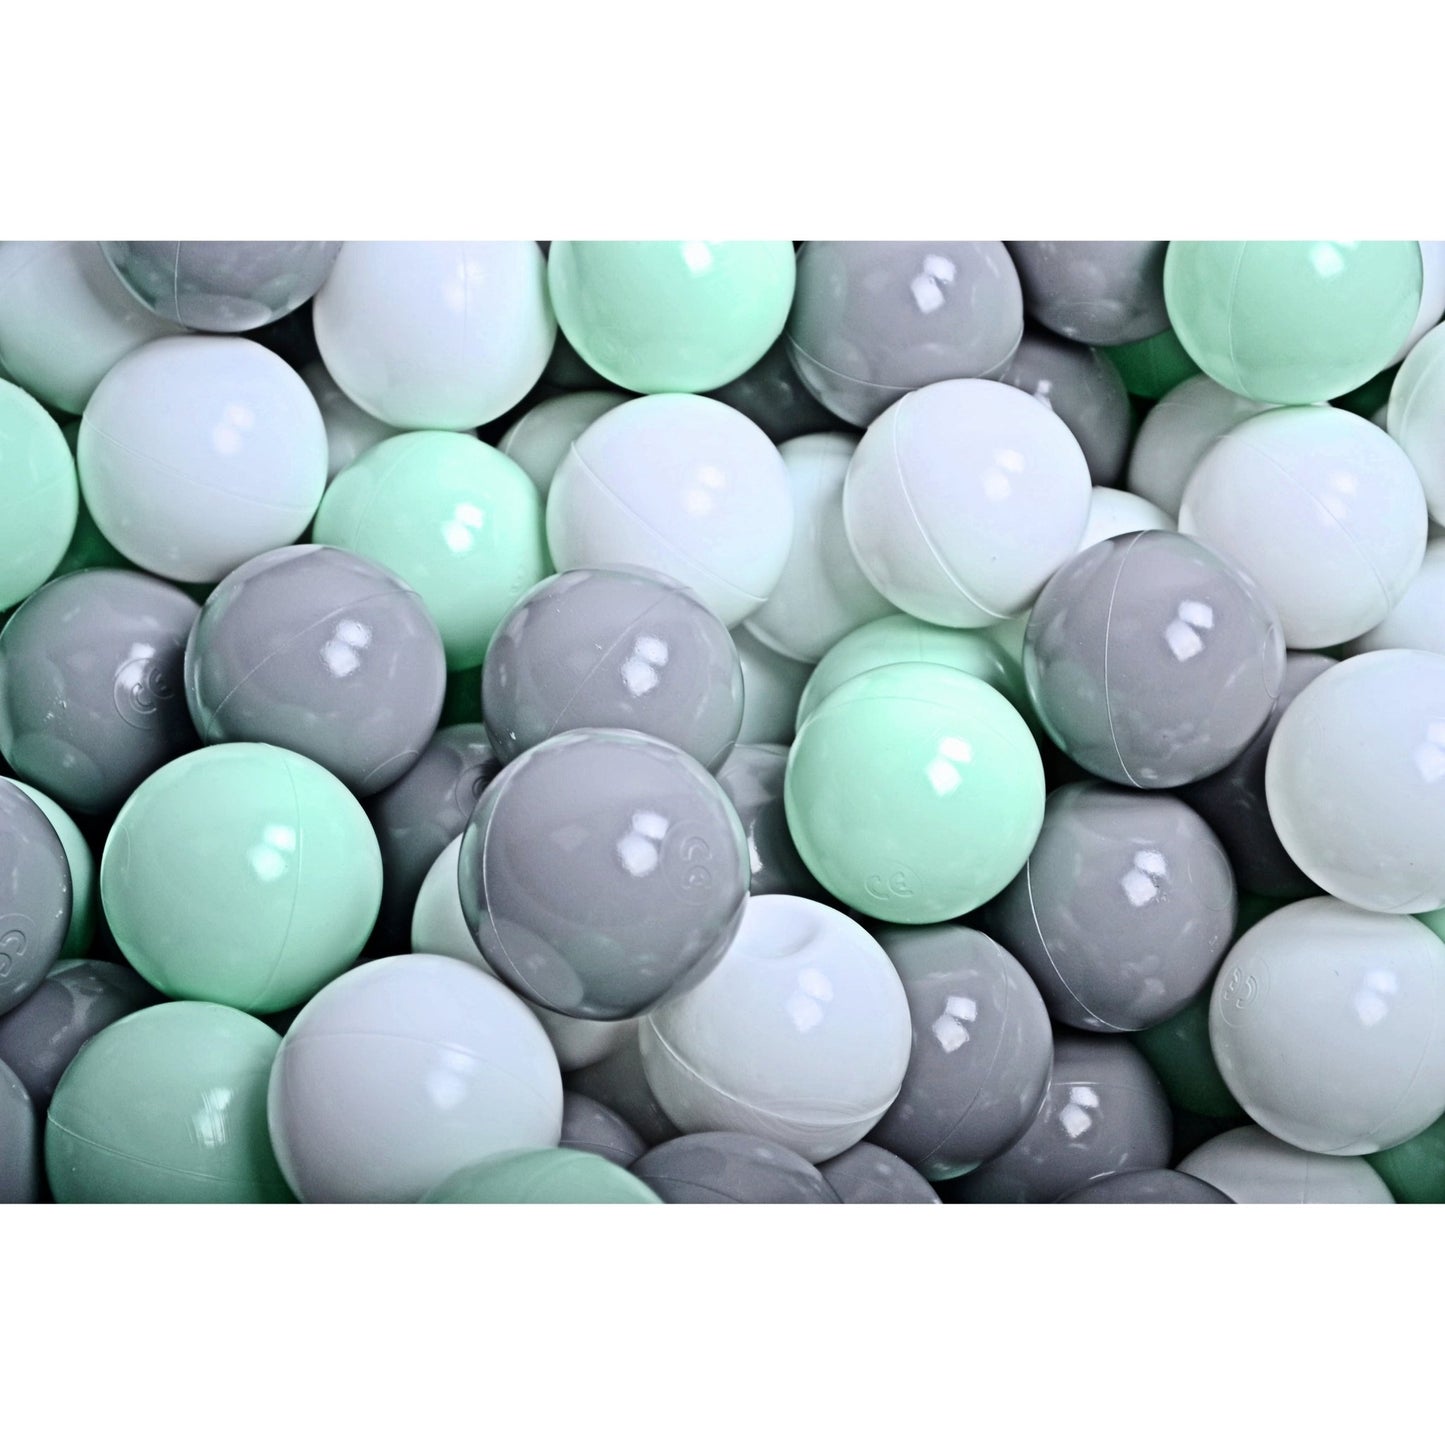 Fluffy Grey Boucle Round Foam Ball Pit - Select Your Own Balls - The Online Toy Shop - Ball Pit - 7